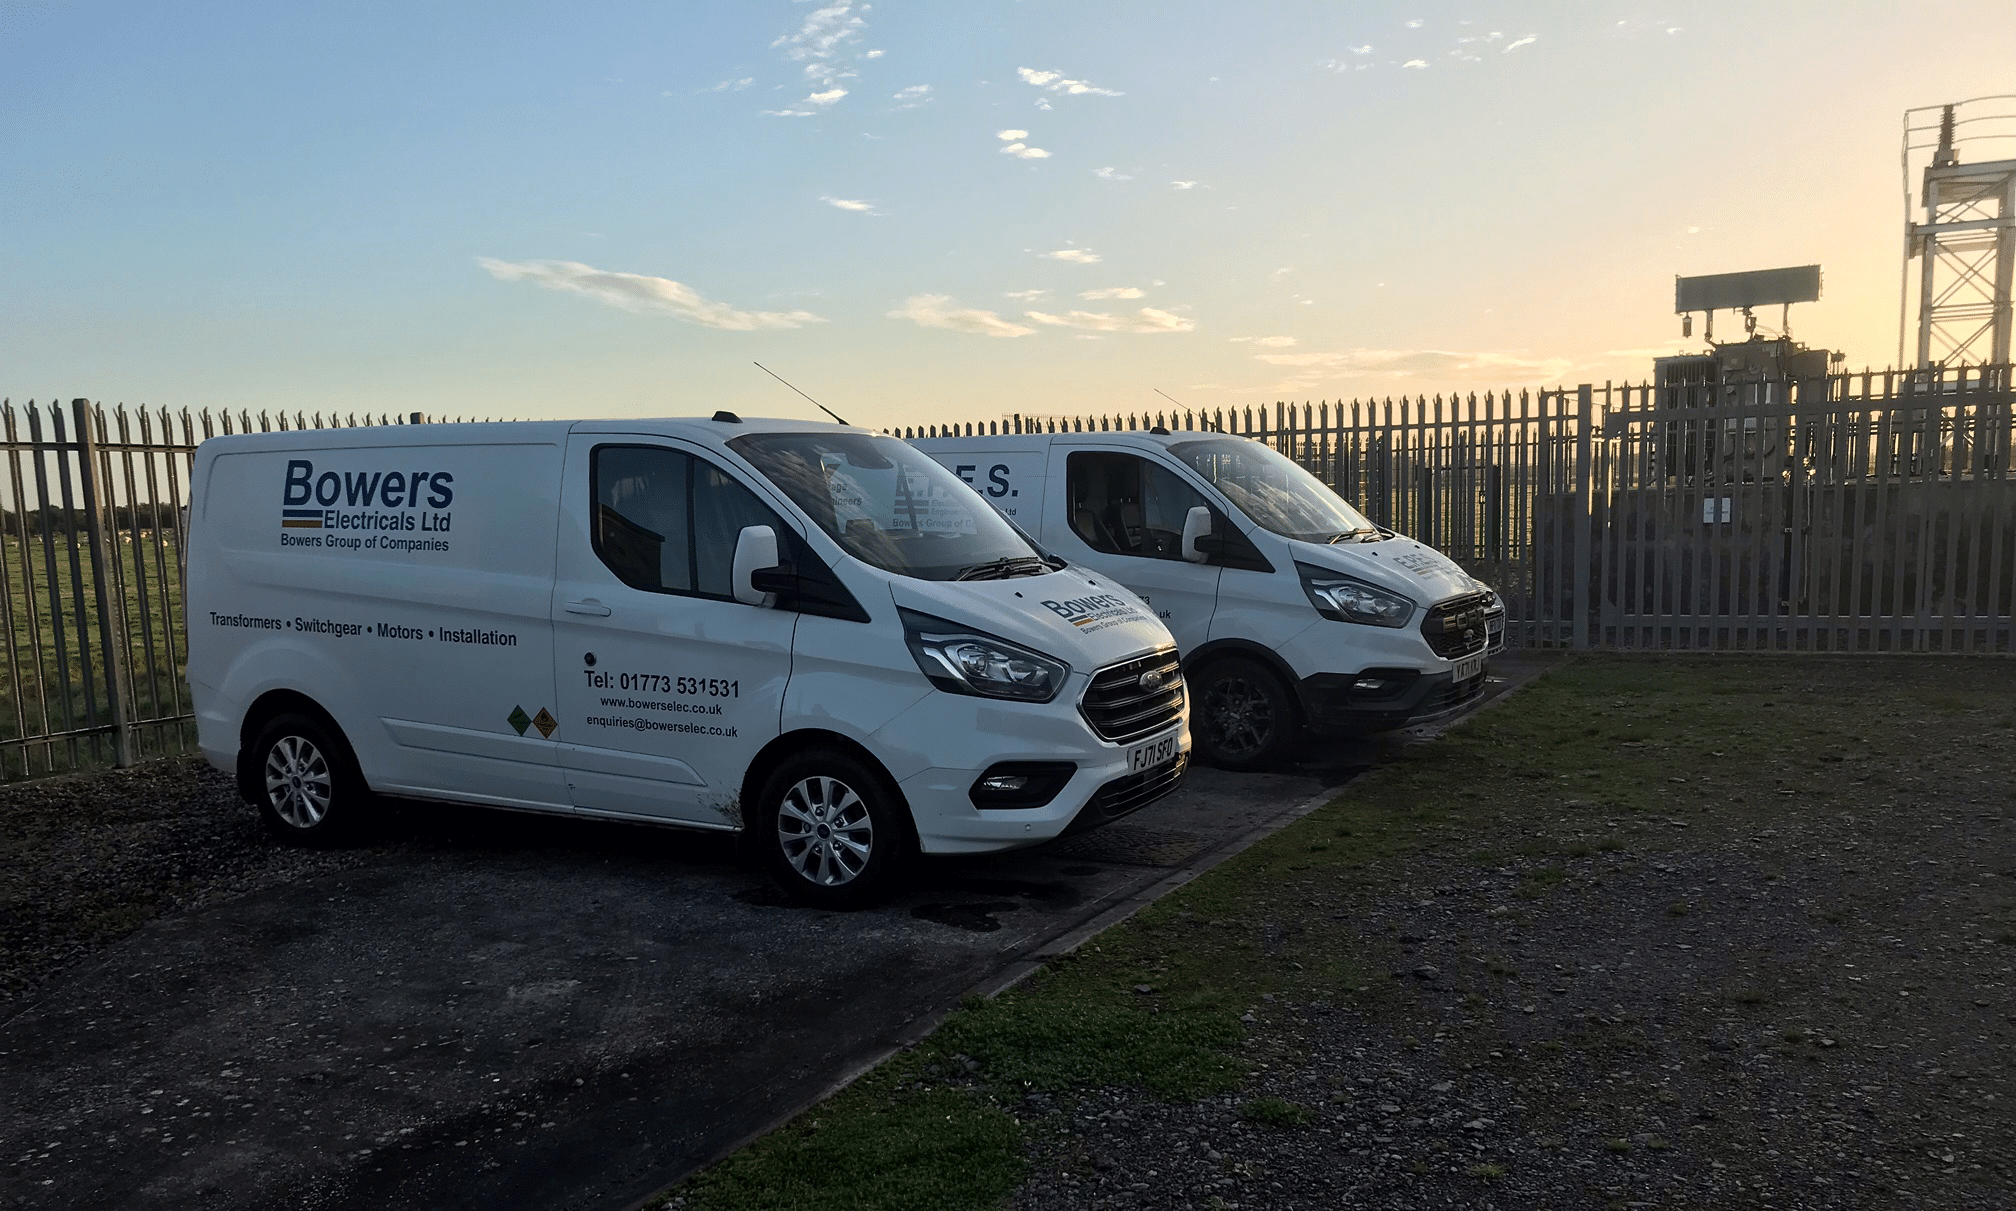 bowers and epes maintenance vans on-site at a solar farm